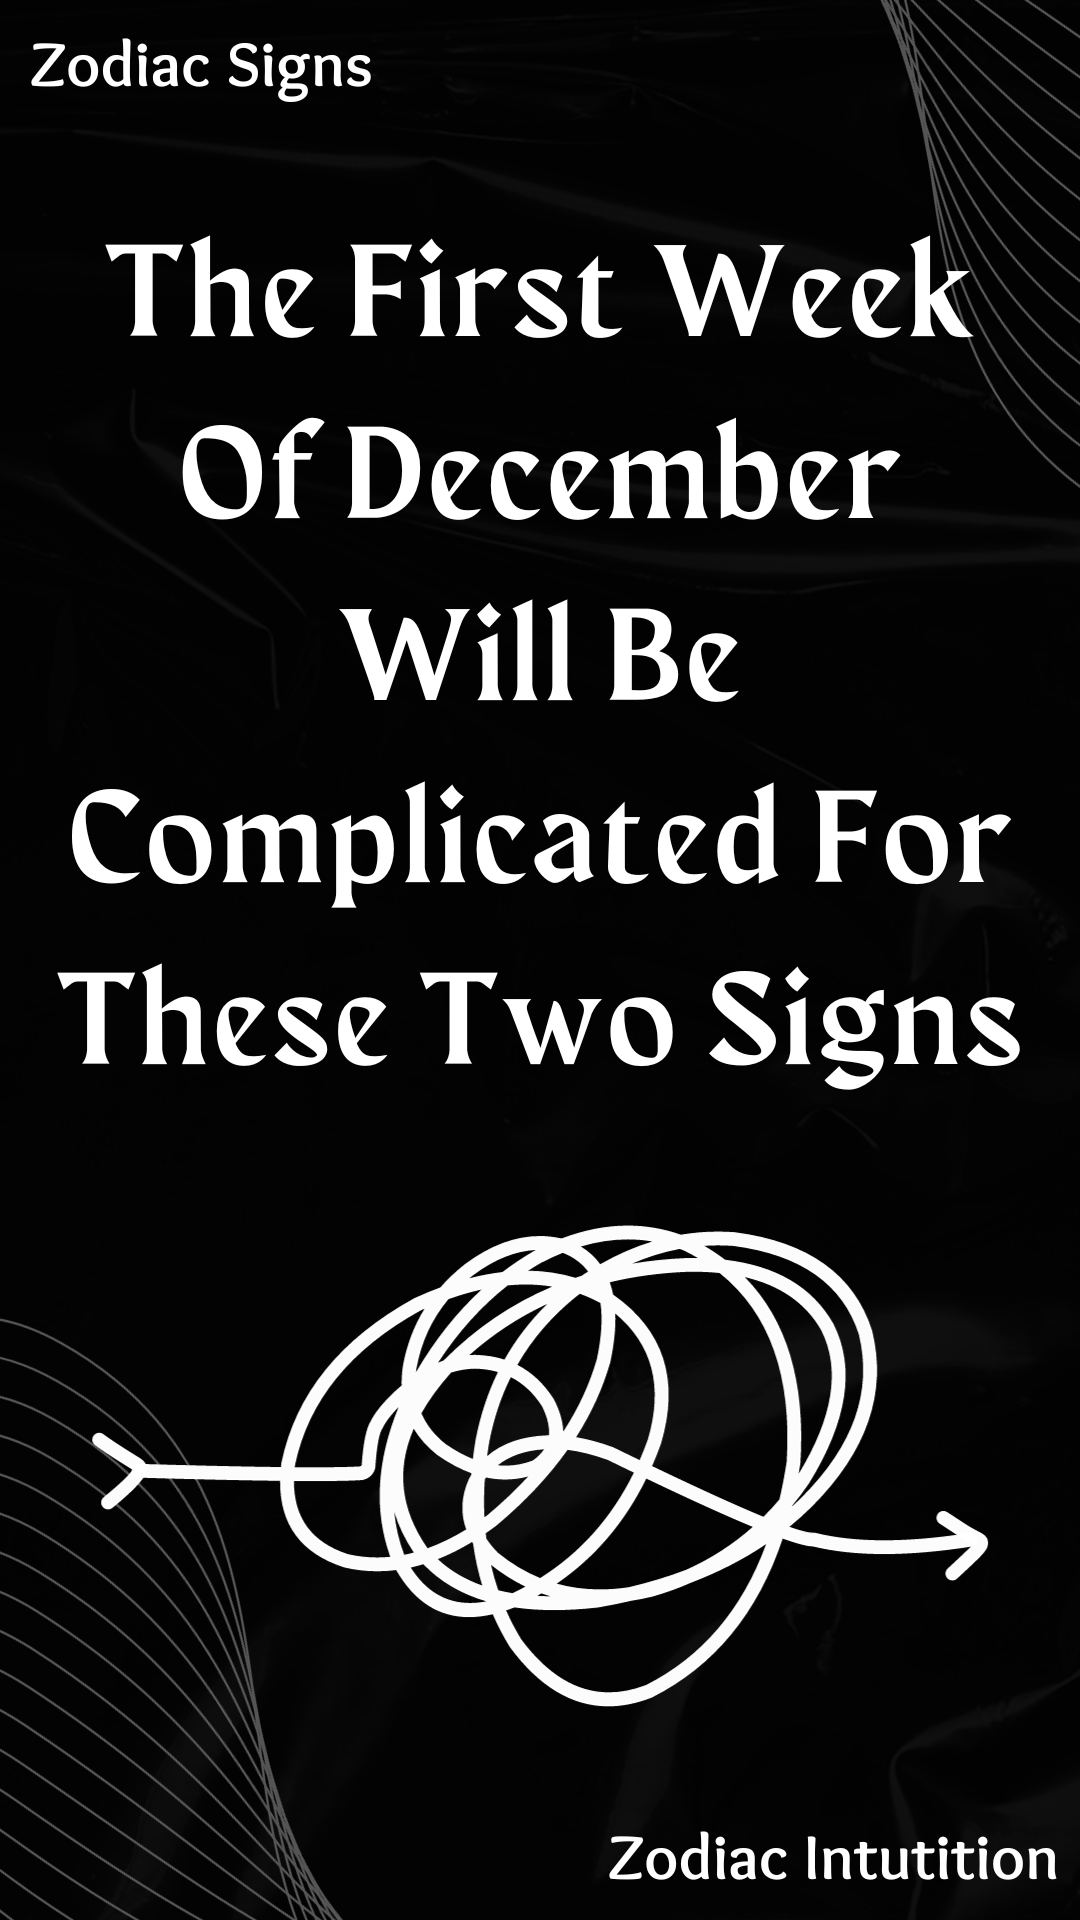 The First Week Of December Will Be Complicated For These Two Signs